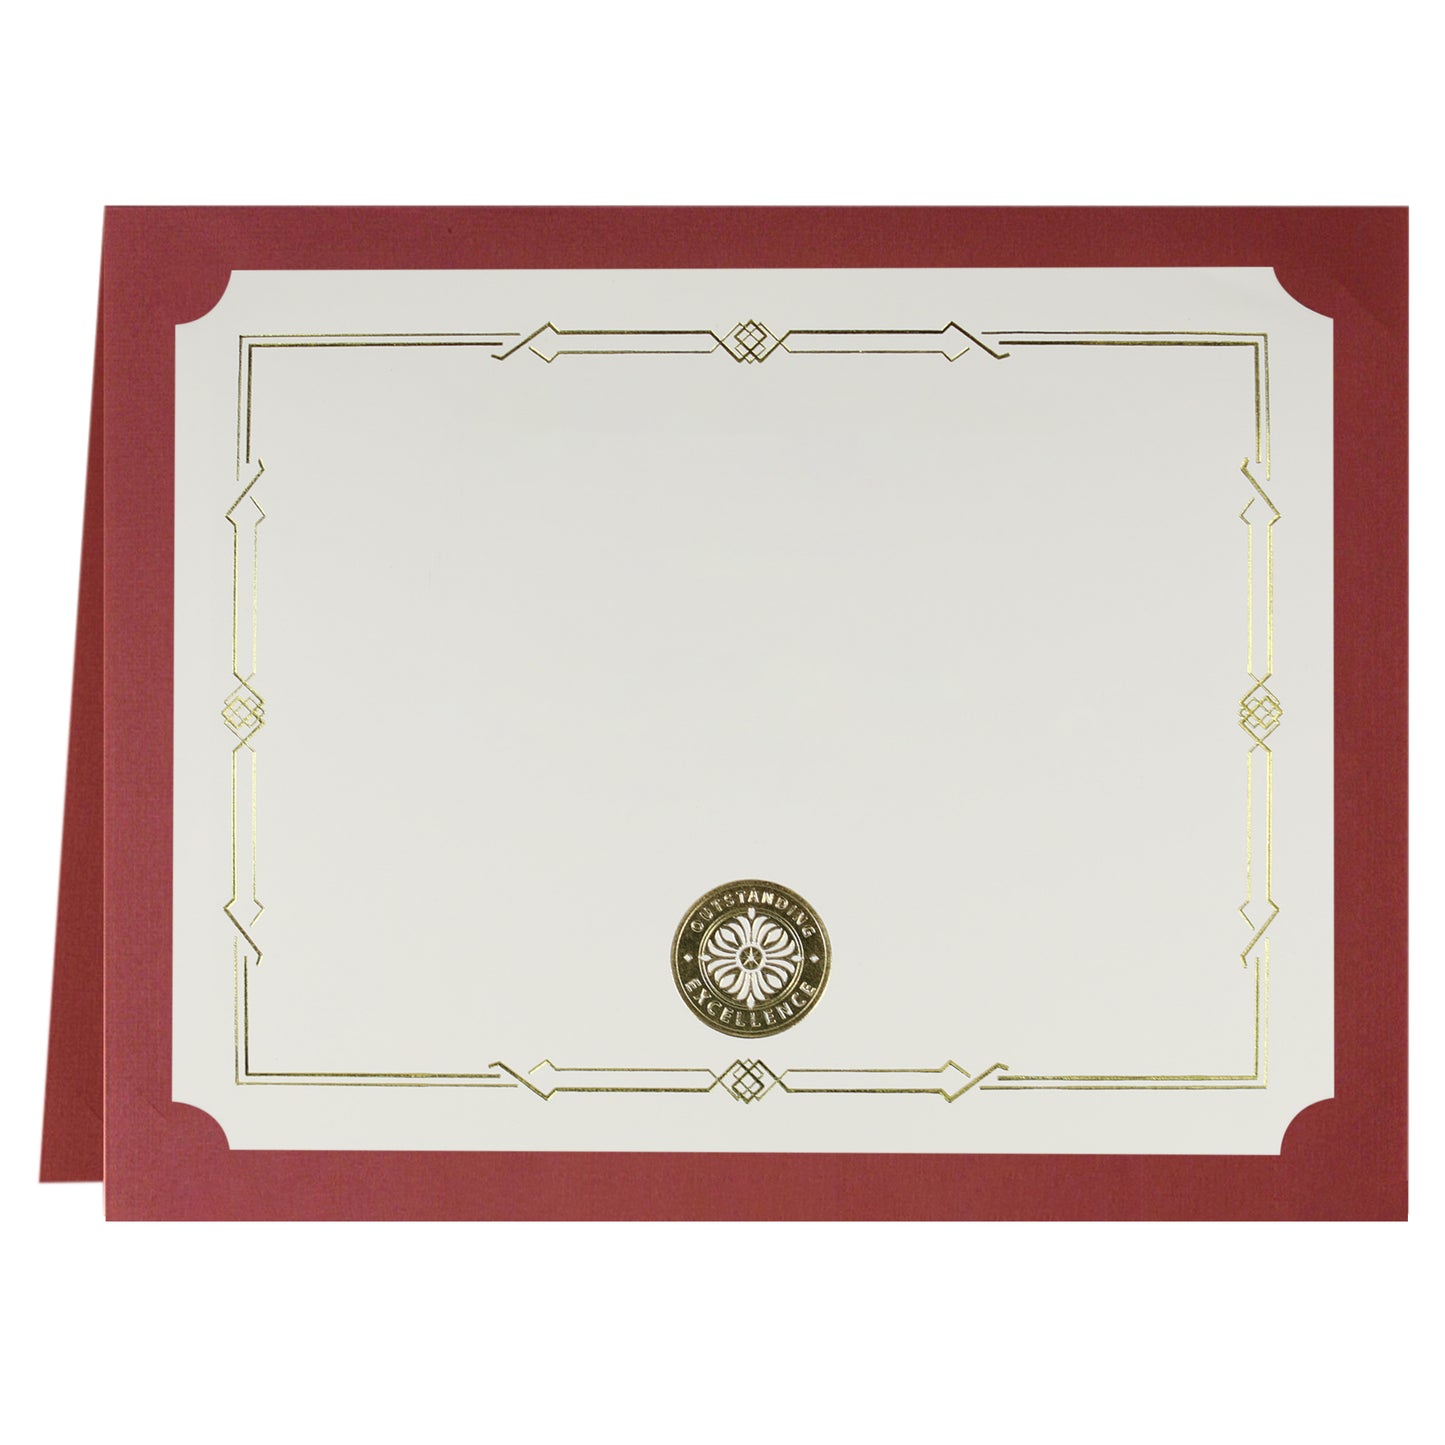 St. James® Certificate Holders/Document Covers/Diploma Holders, Red, Gold Foil Border, Linen Finish, Pack of 5, 83807